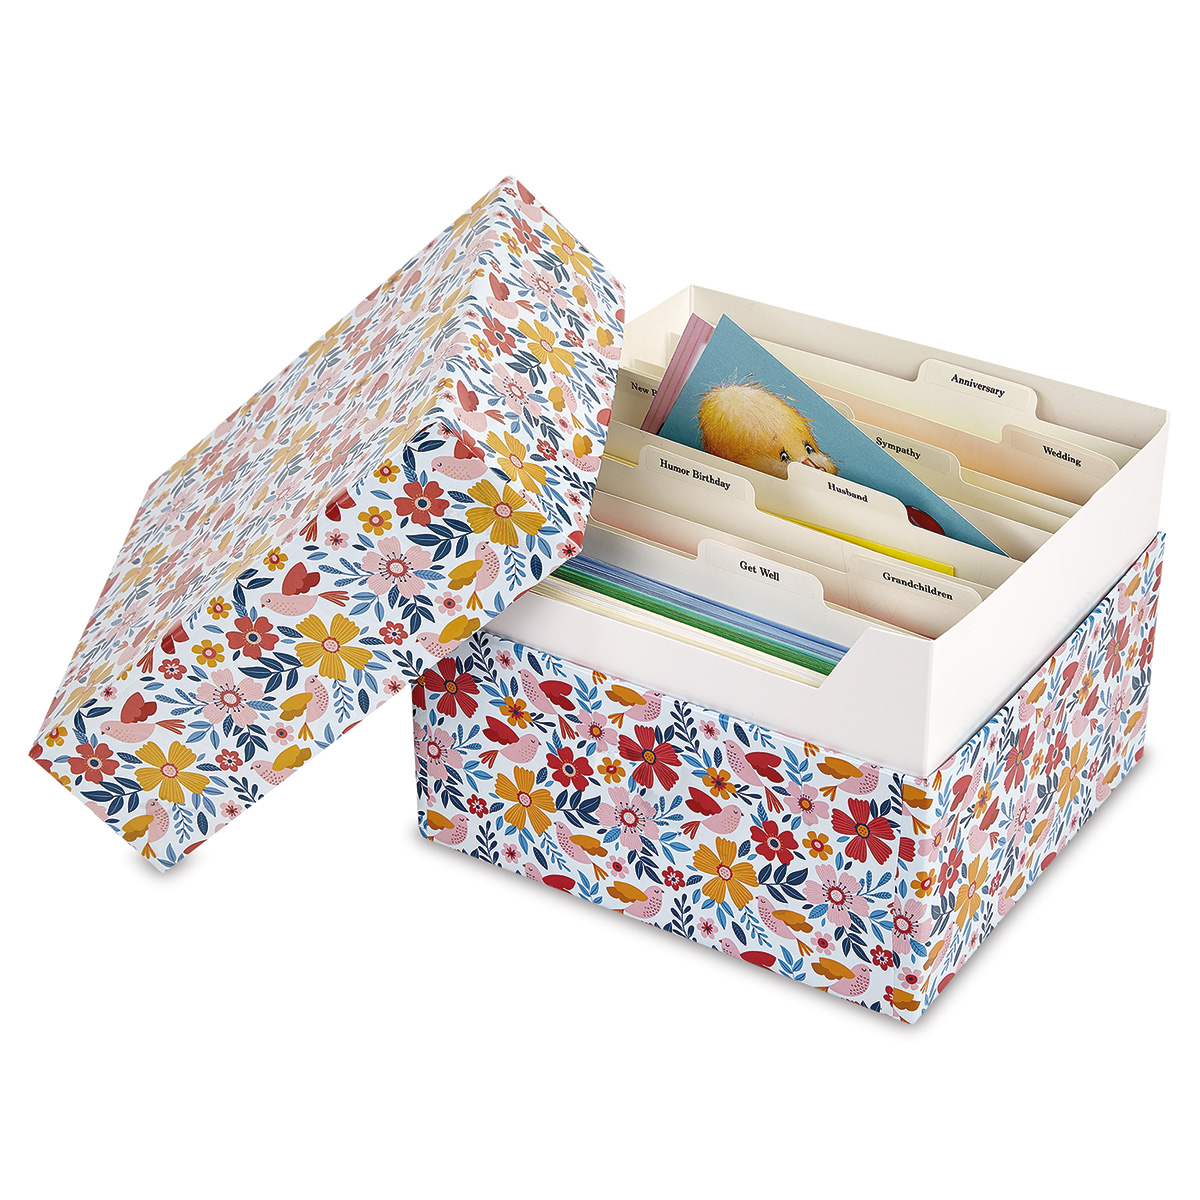 Greeting Card Organizer Box Dividers - Months - (Organizing Box Sold  Separately) - 4 1/2 inches tall, 7 1/4 inches wide